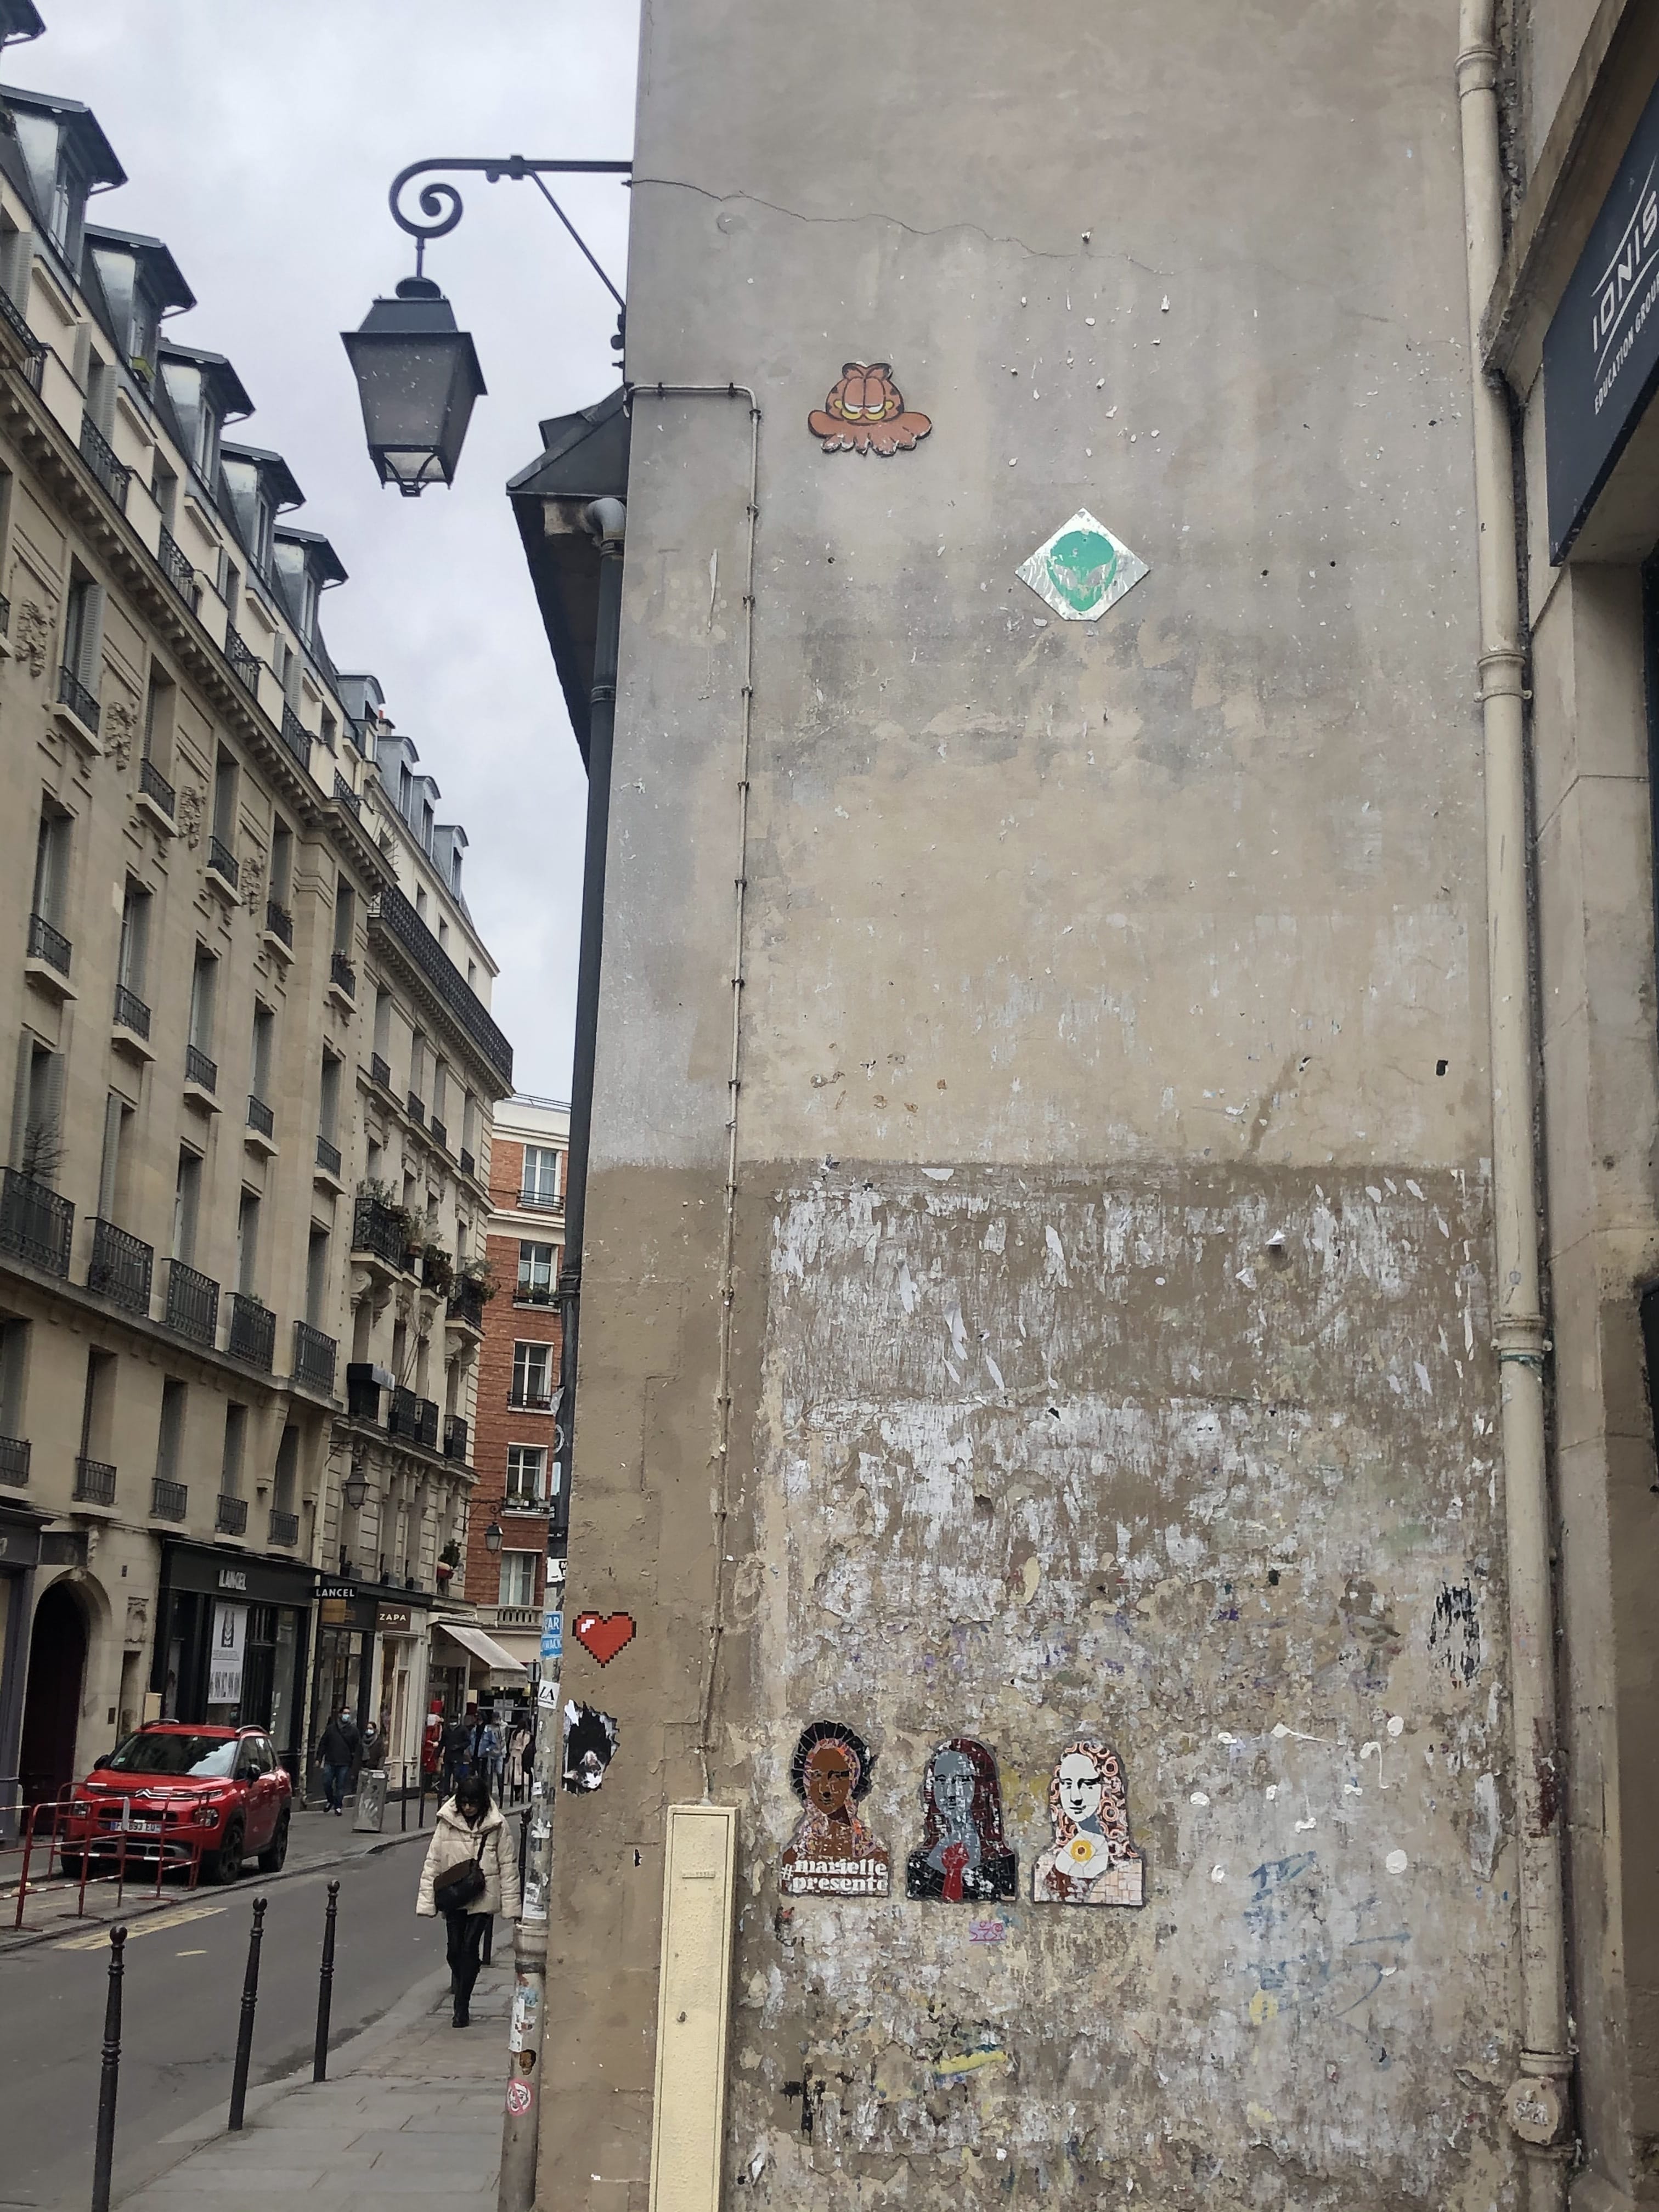 Sticking 4766 Coeur pixel by the artist Gzup captured by Artparis in Paris France